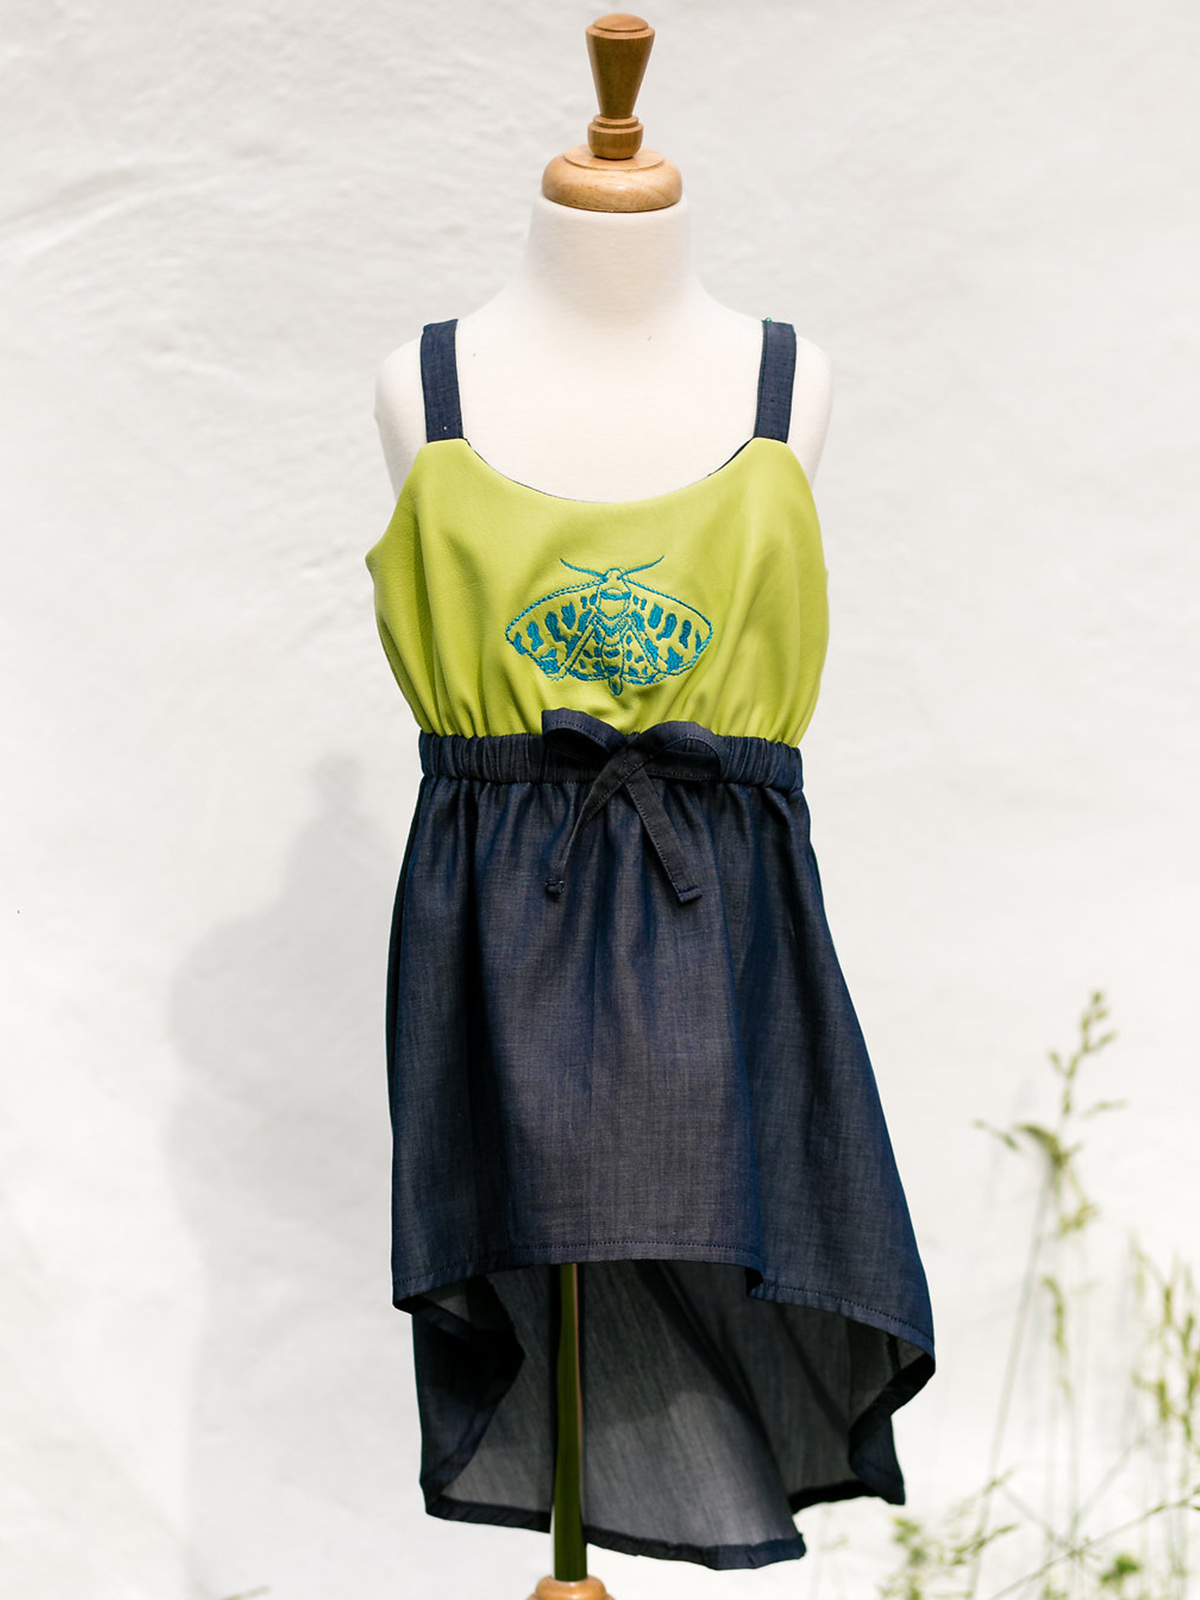 Embroidered Dress with Alison Glass Exlibris Embroidery Design